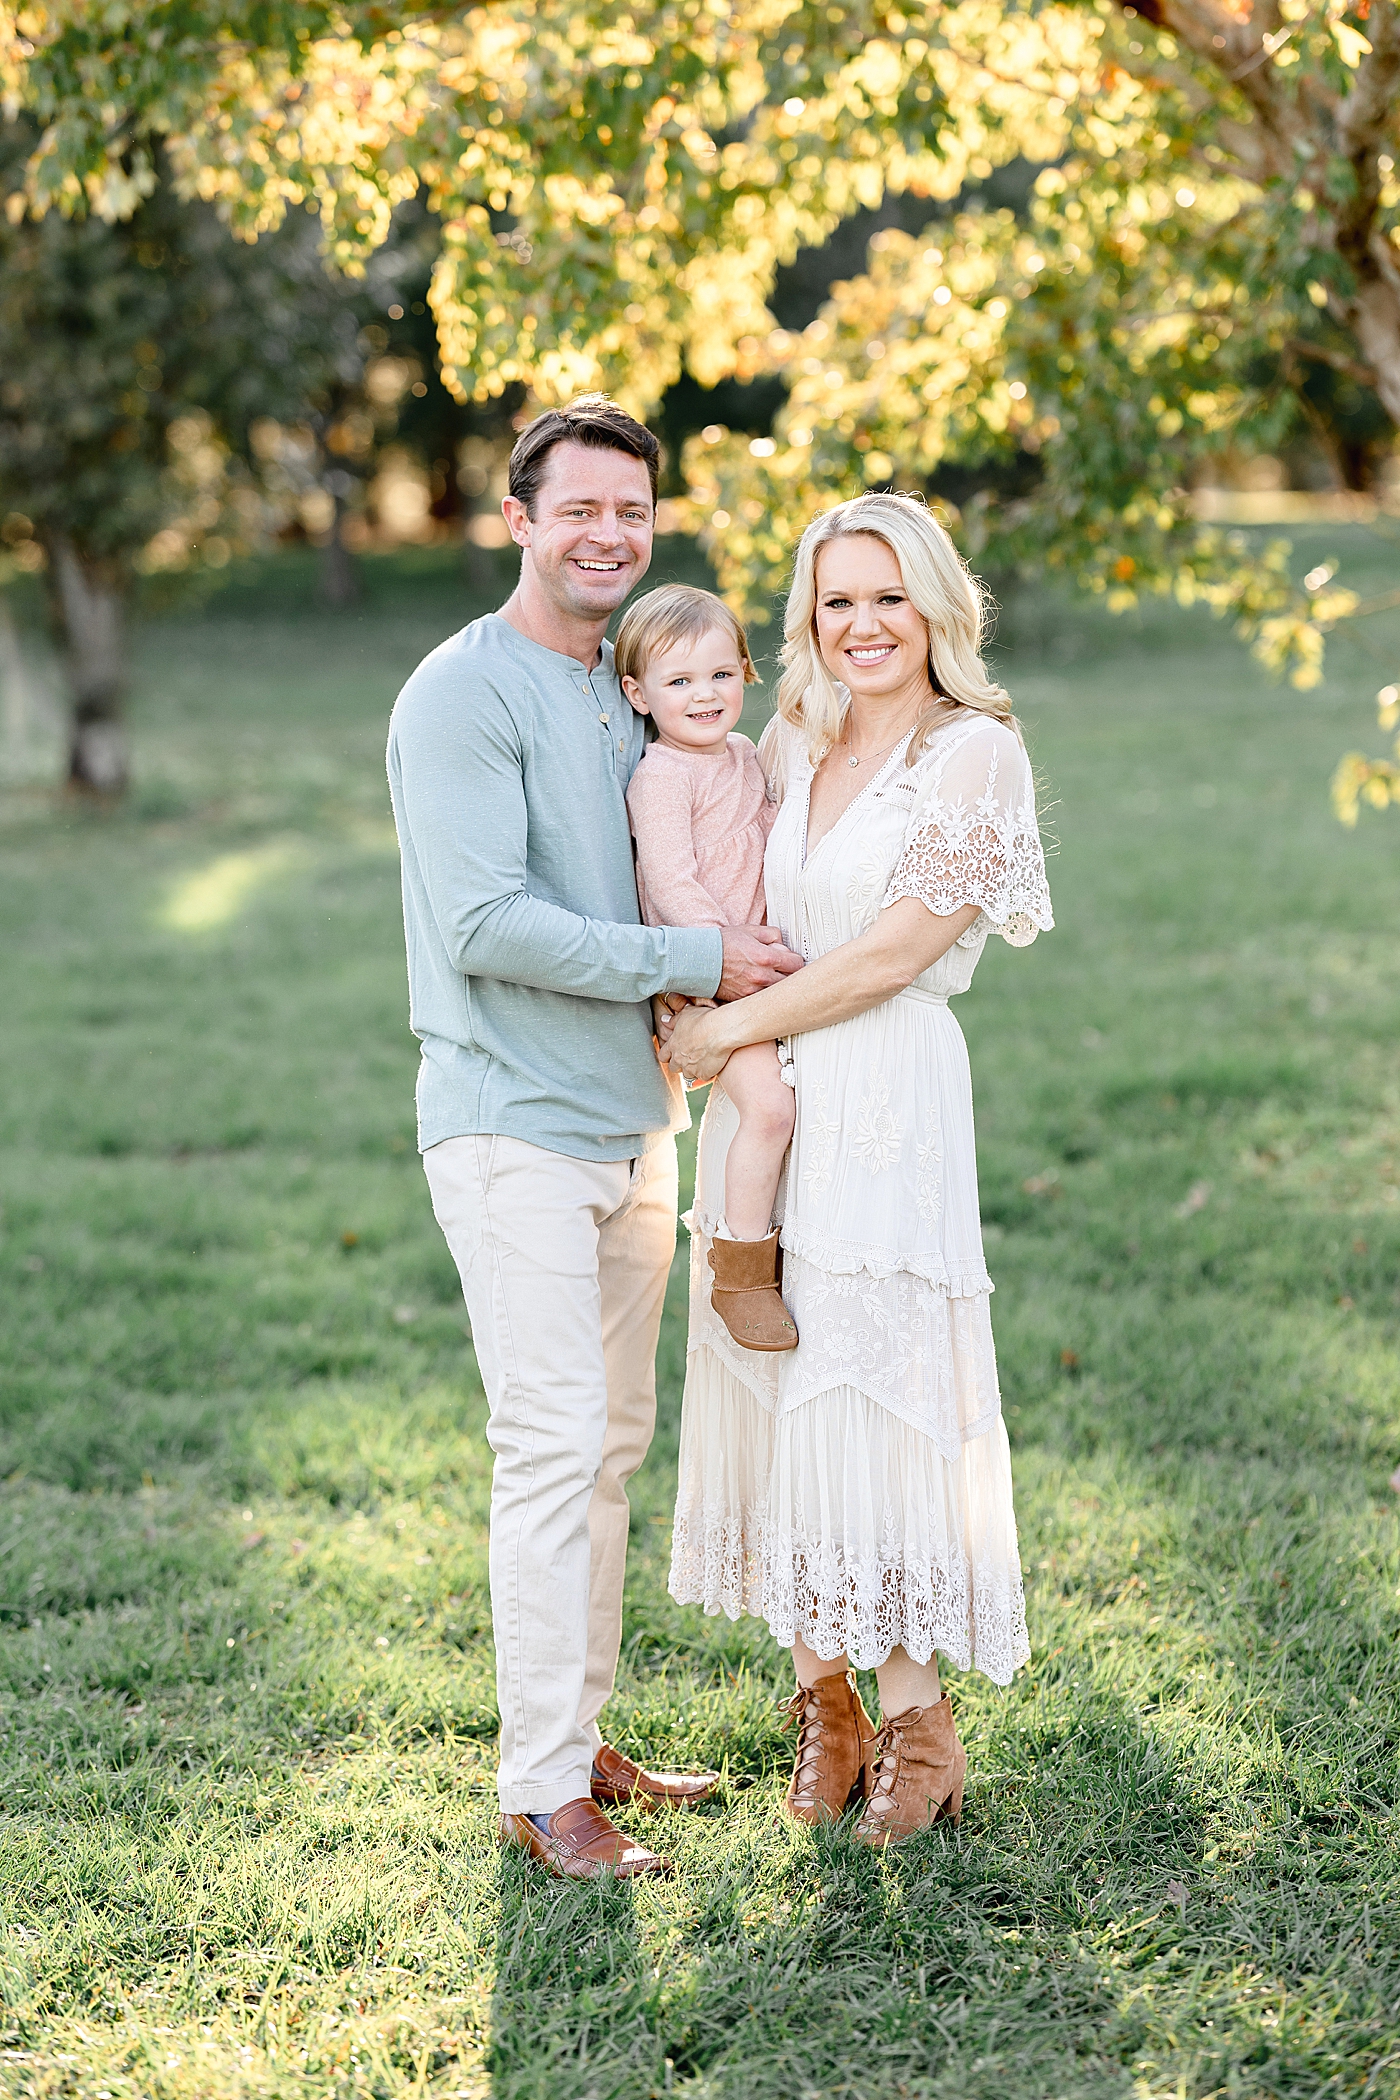 Sunset family session with parents and two year old daughter. Photo by Brittany Elise Photography.